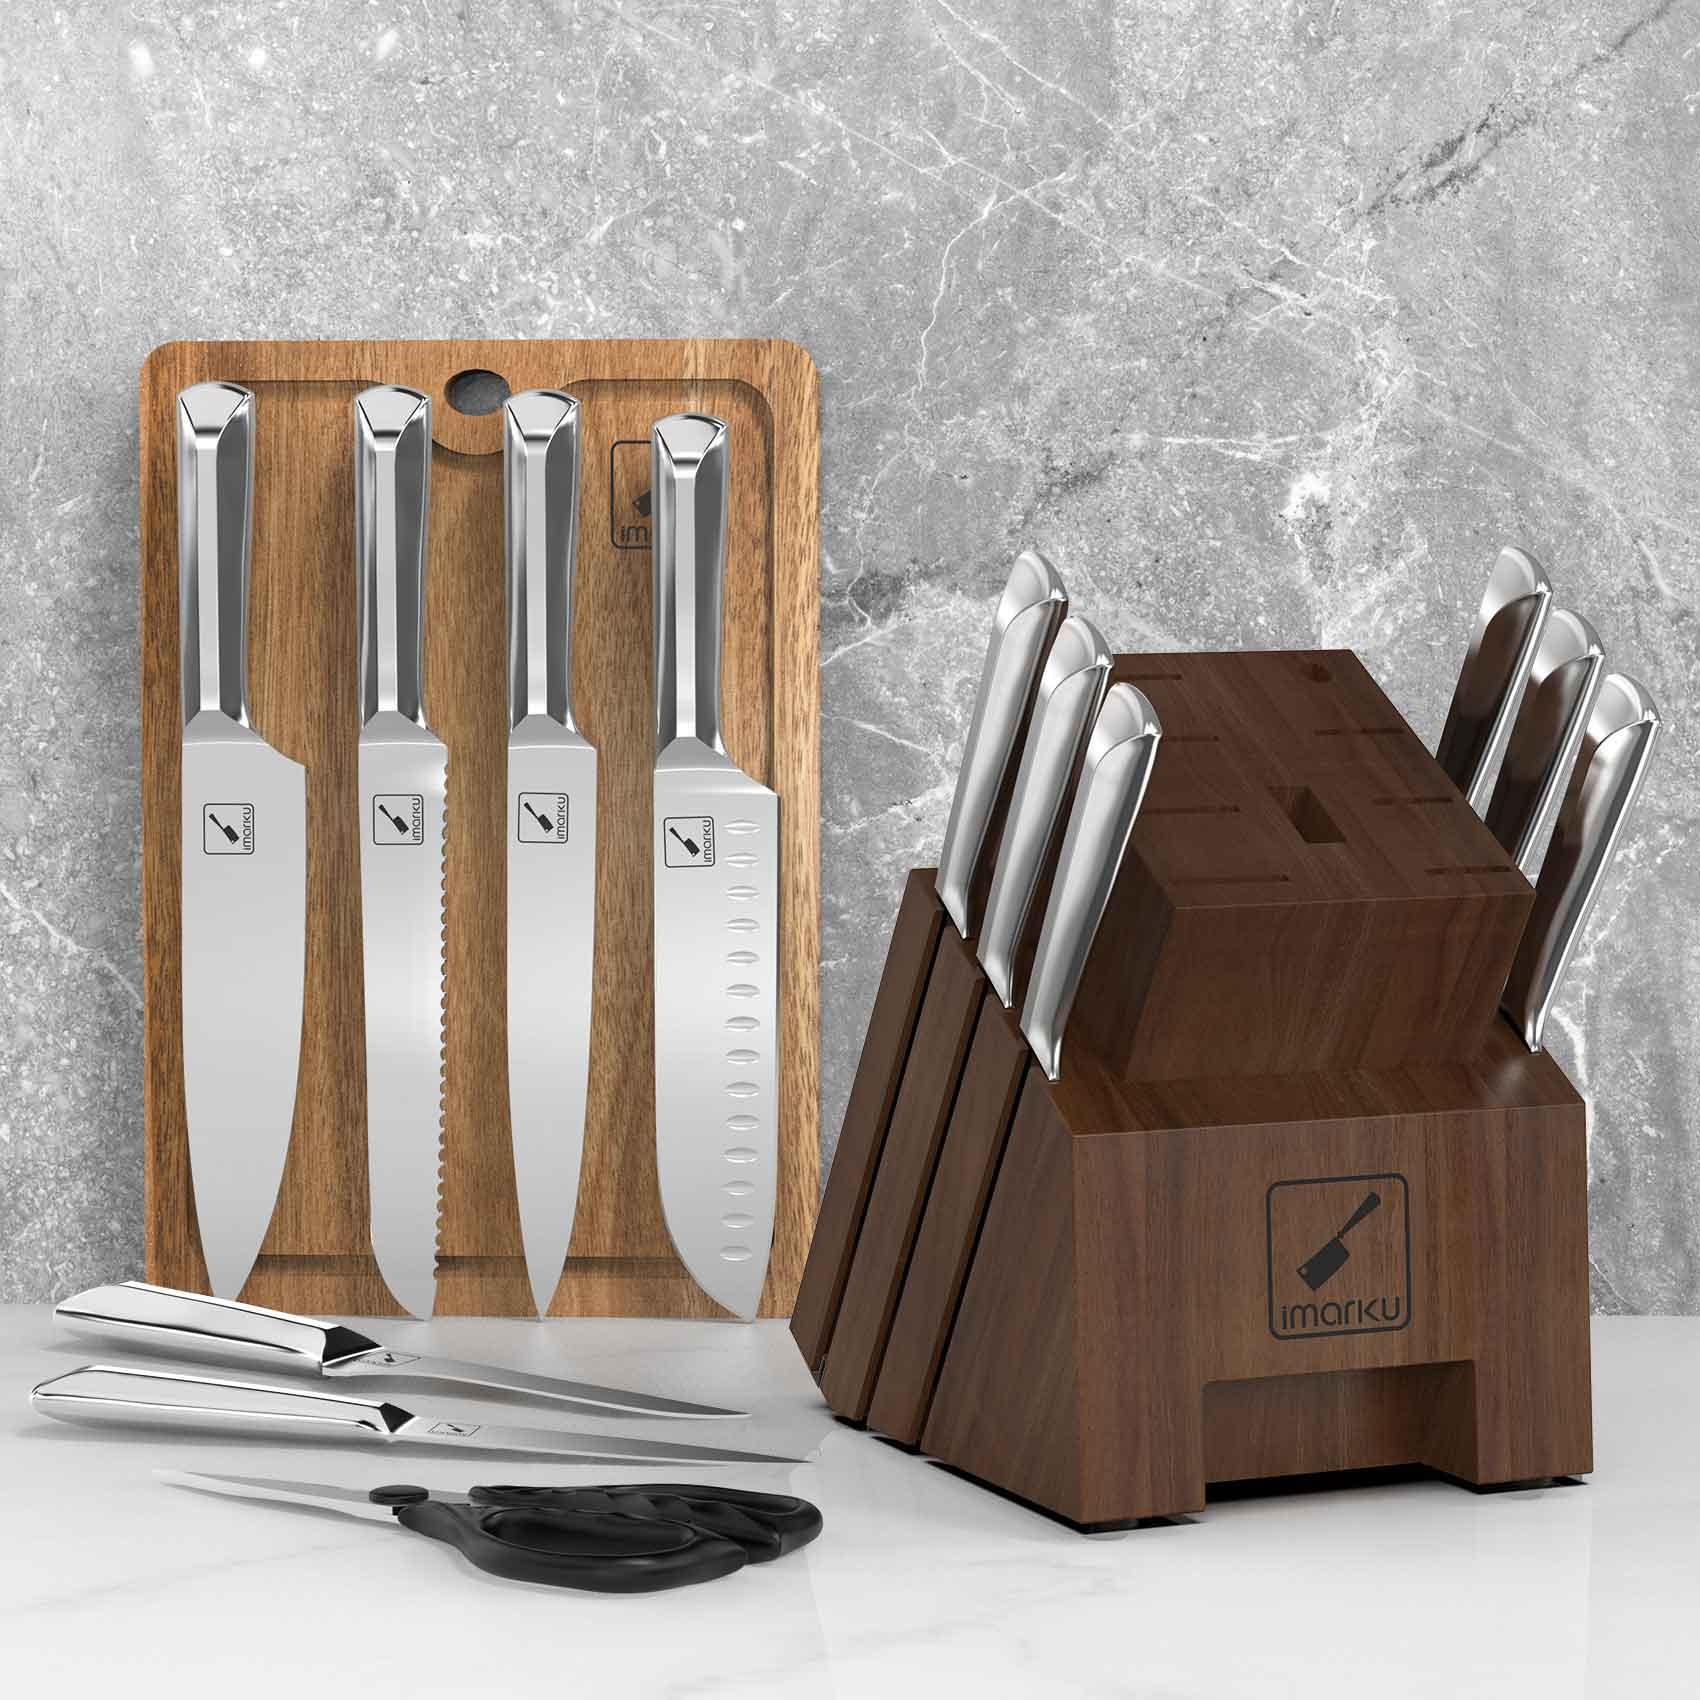 15-Piece Knife Set with Block with a Sharpening Rod - IMARKU